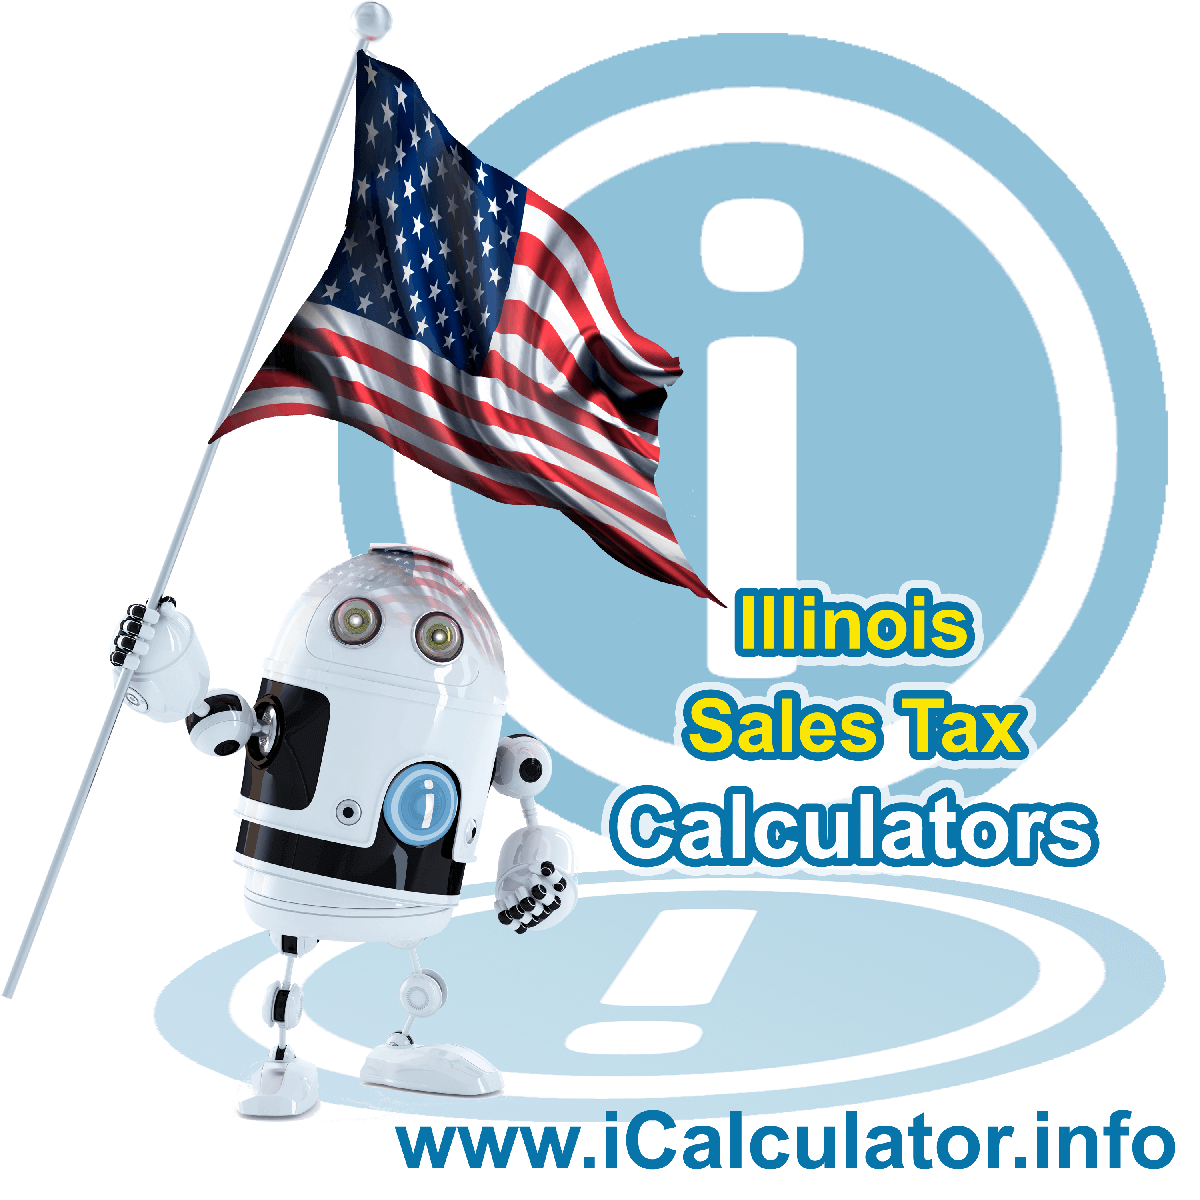 Farmersville Sales Rates: This image illustrates a calculator robot calculating Farmersville sales tax manually using the Farmersville Sales Tax Formula. You can use this information to calculate Farmersville Sales Tax manually or use the Farmersville Sales Tax Calculator to calculate sales tax online.